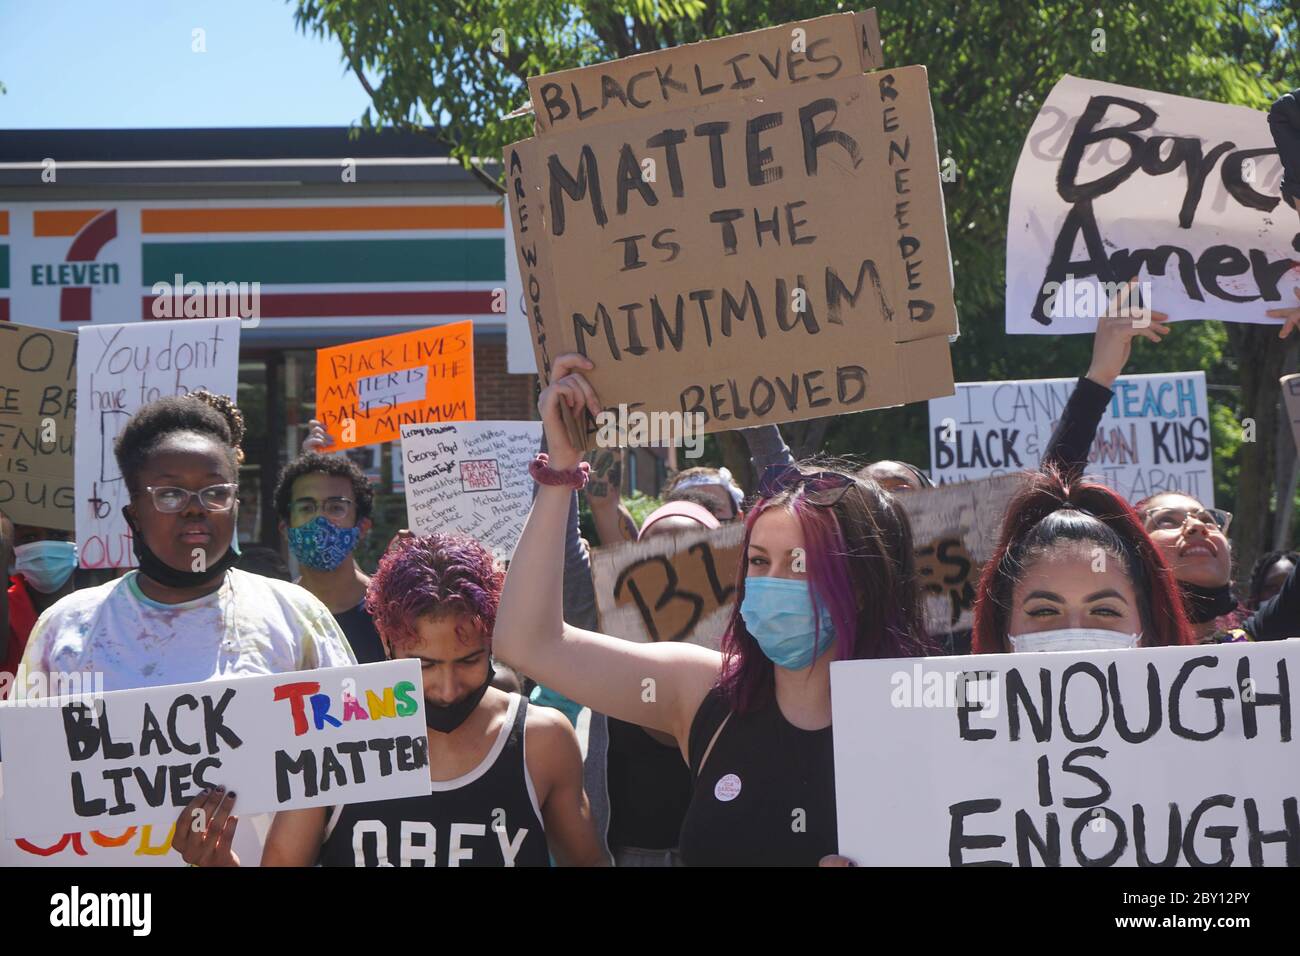 George Floyd Black Lives Matter Protest - Young People Holding up signs, Enough is Enough stock photograph - Ridgefield Park, New Jersey, USA, June 8t Stock Photo